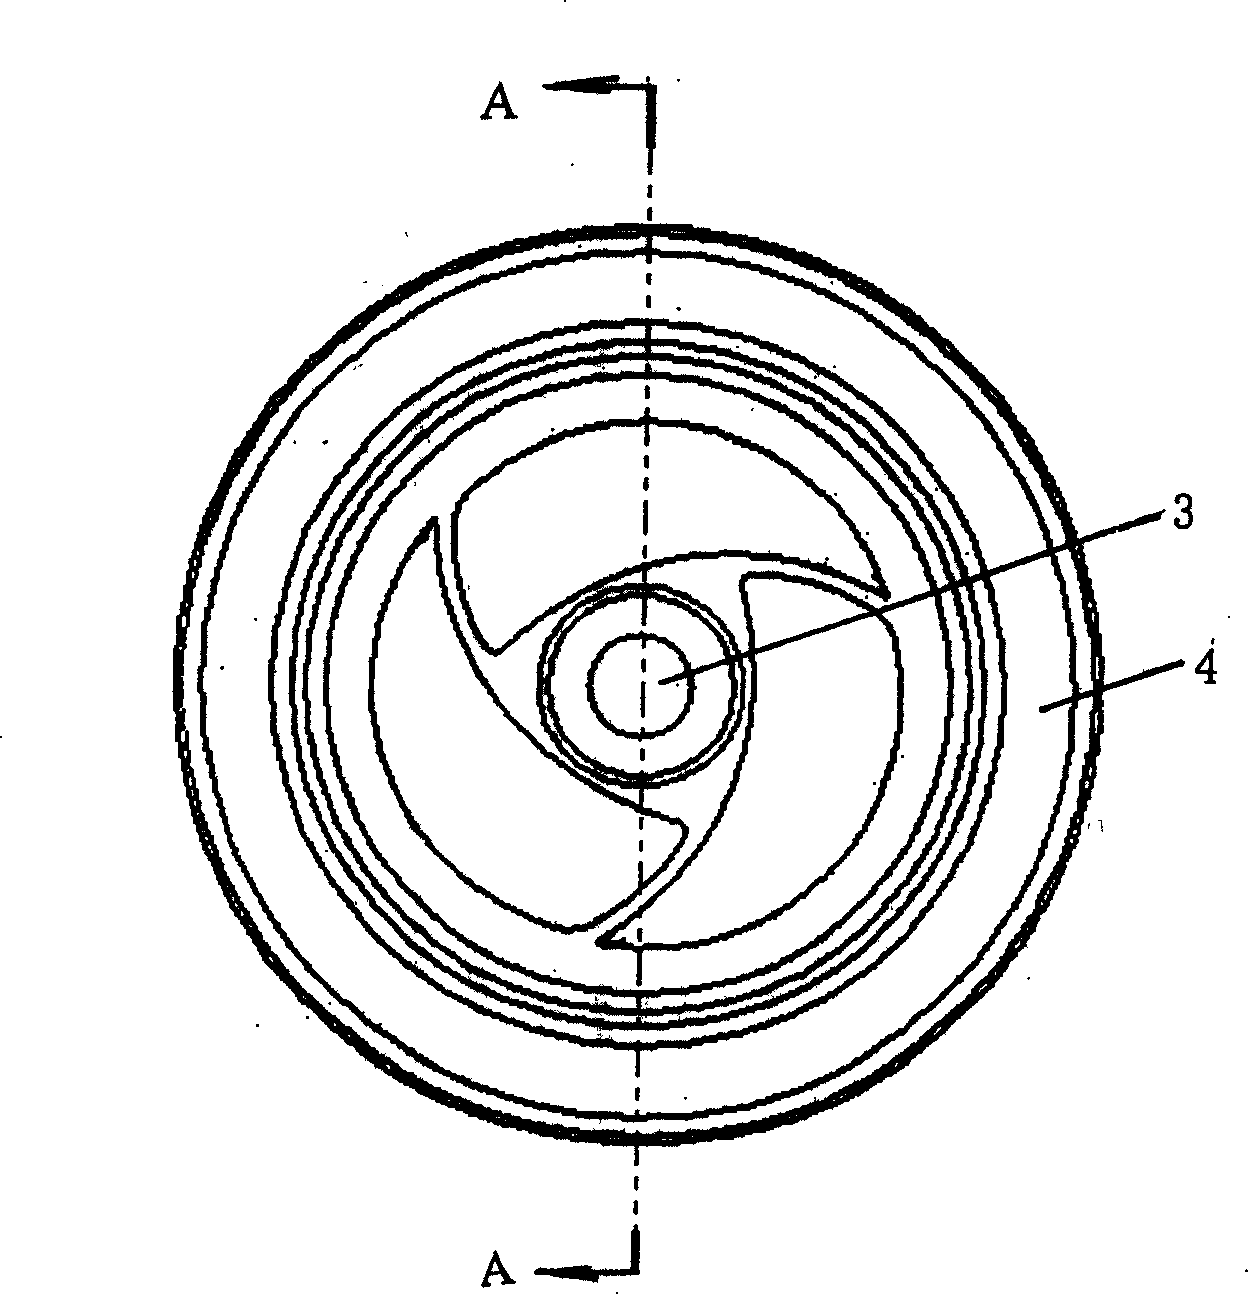 Idler wheel structure of dust collector